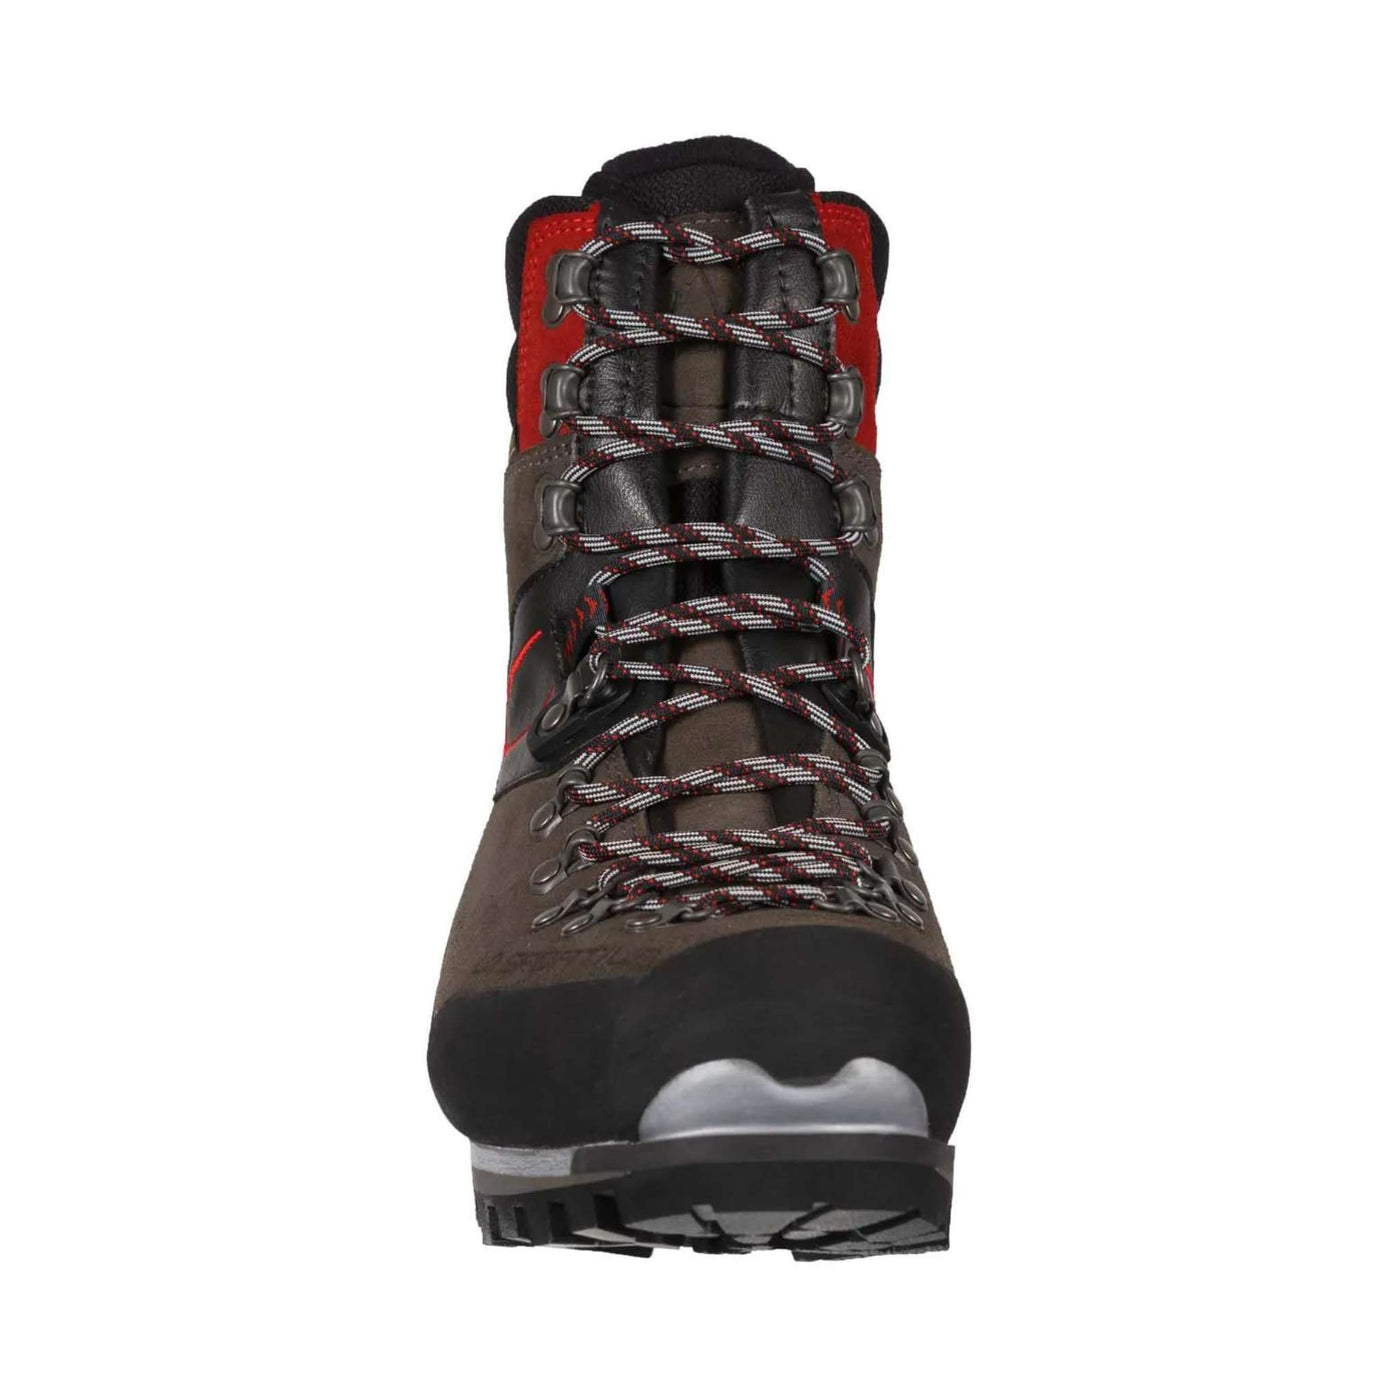 La Sportiva Karakorum Evo Gore-Tex | Tramping and Mountaineering Boot | Further Faster Christchurch NZ #anthracite-red